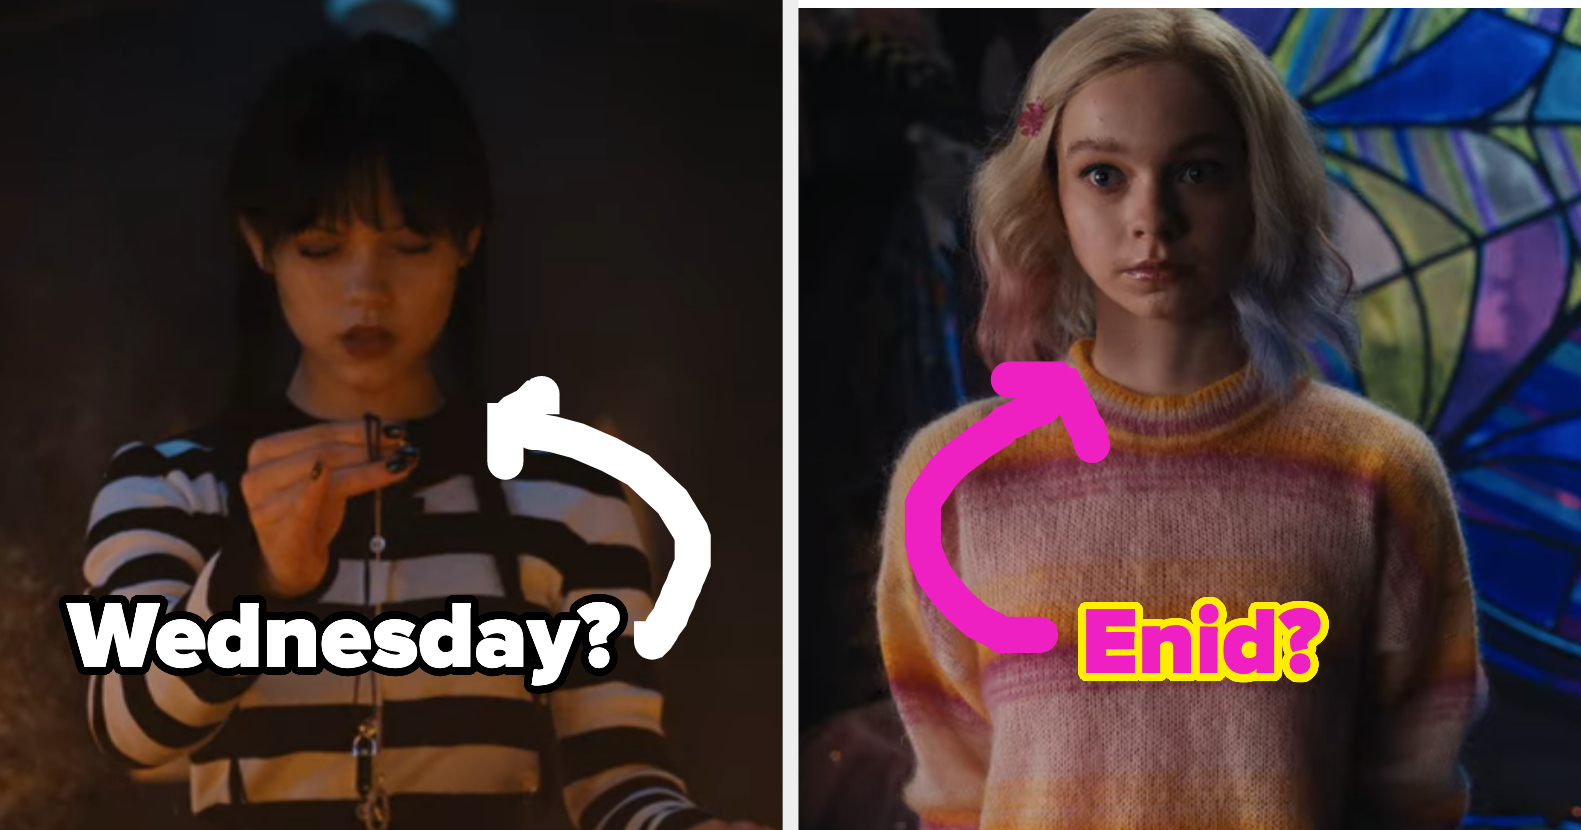 Are You More Wednesday Or Enid?